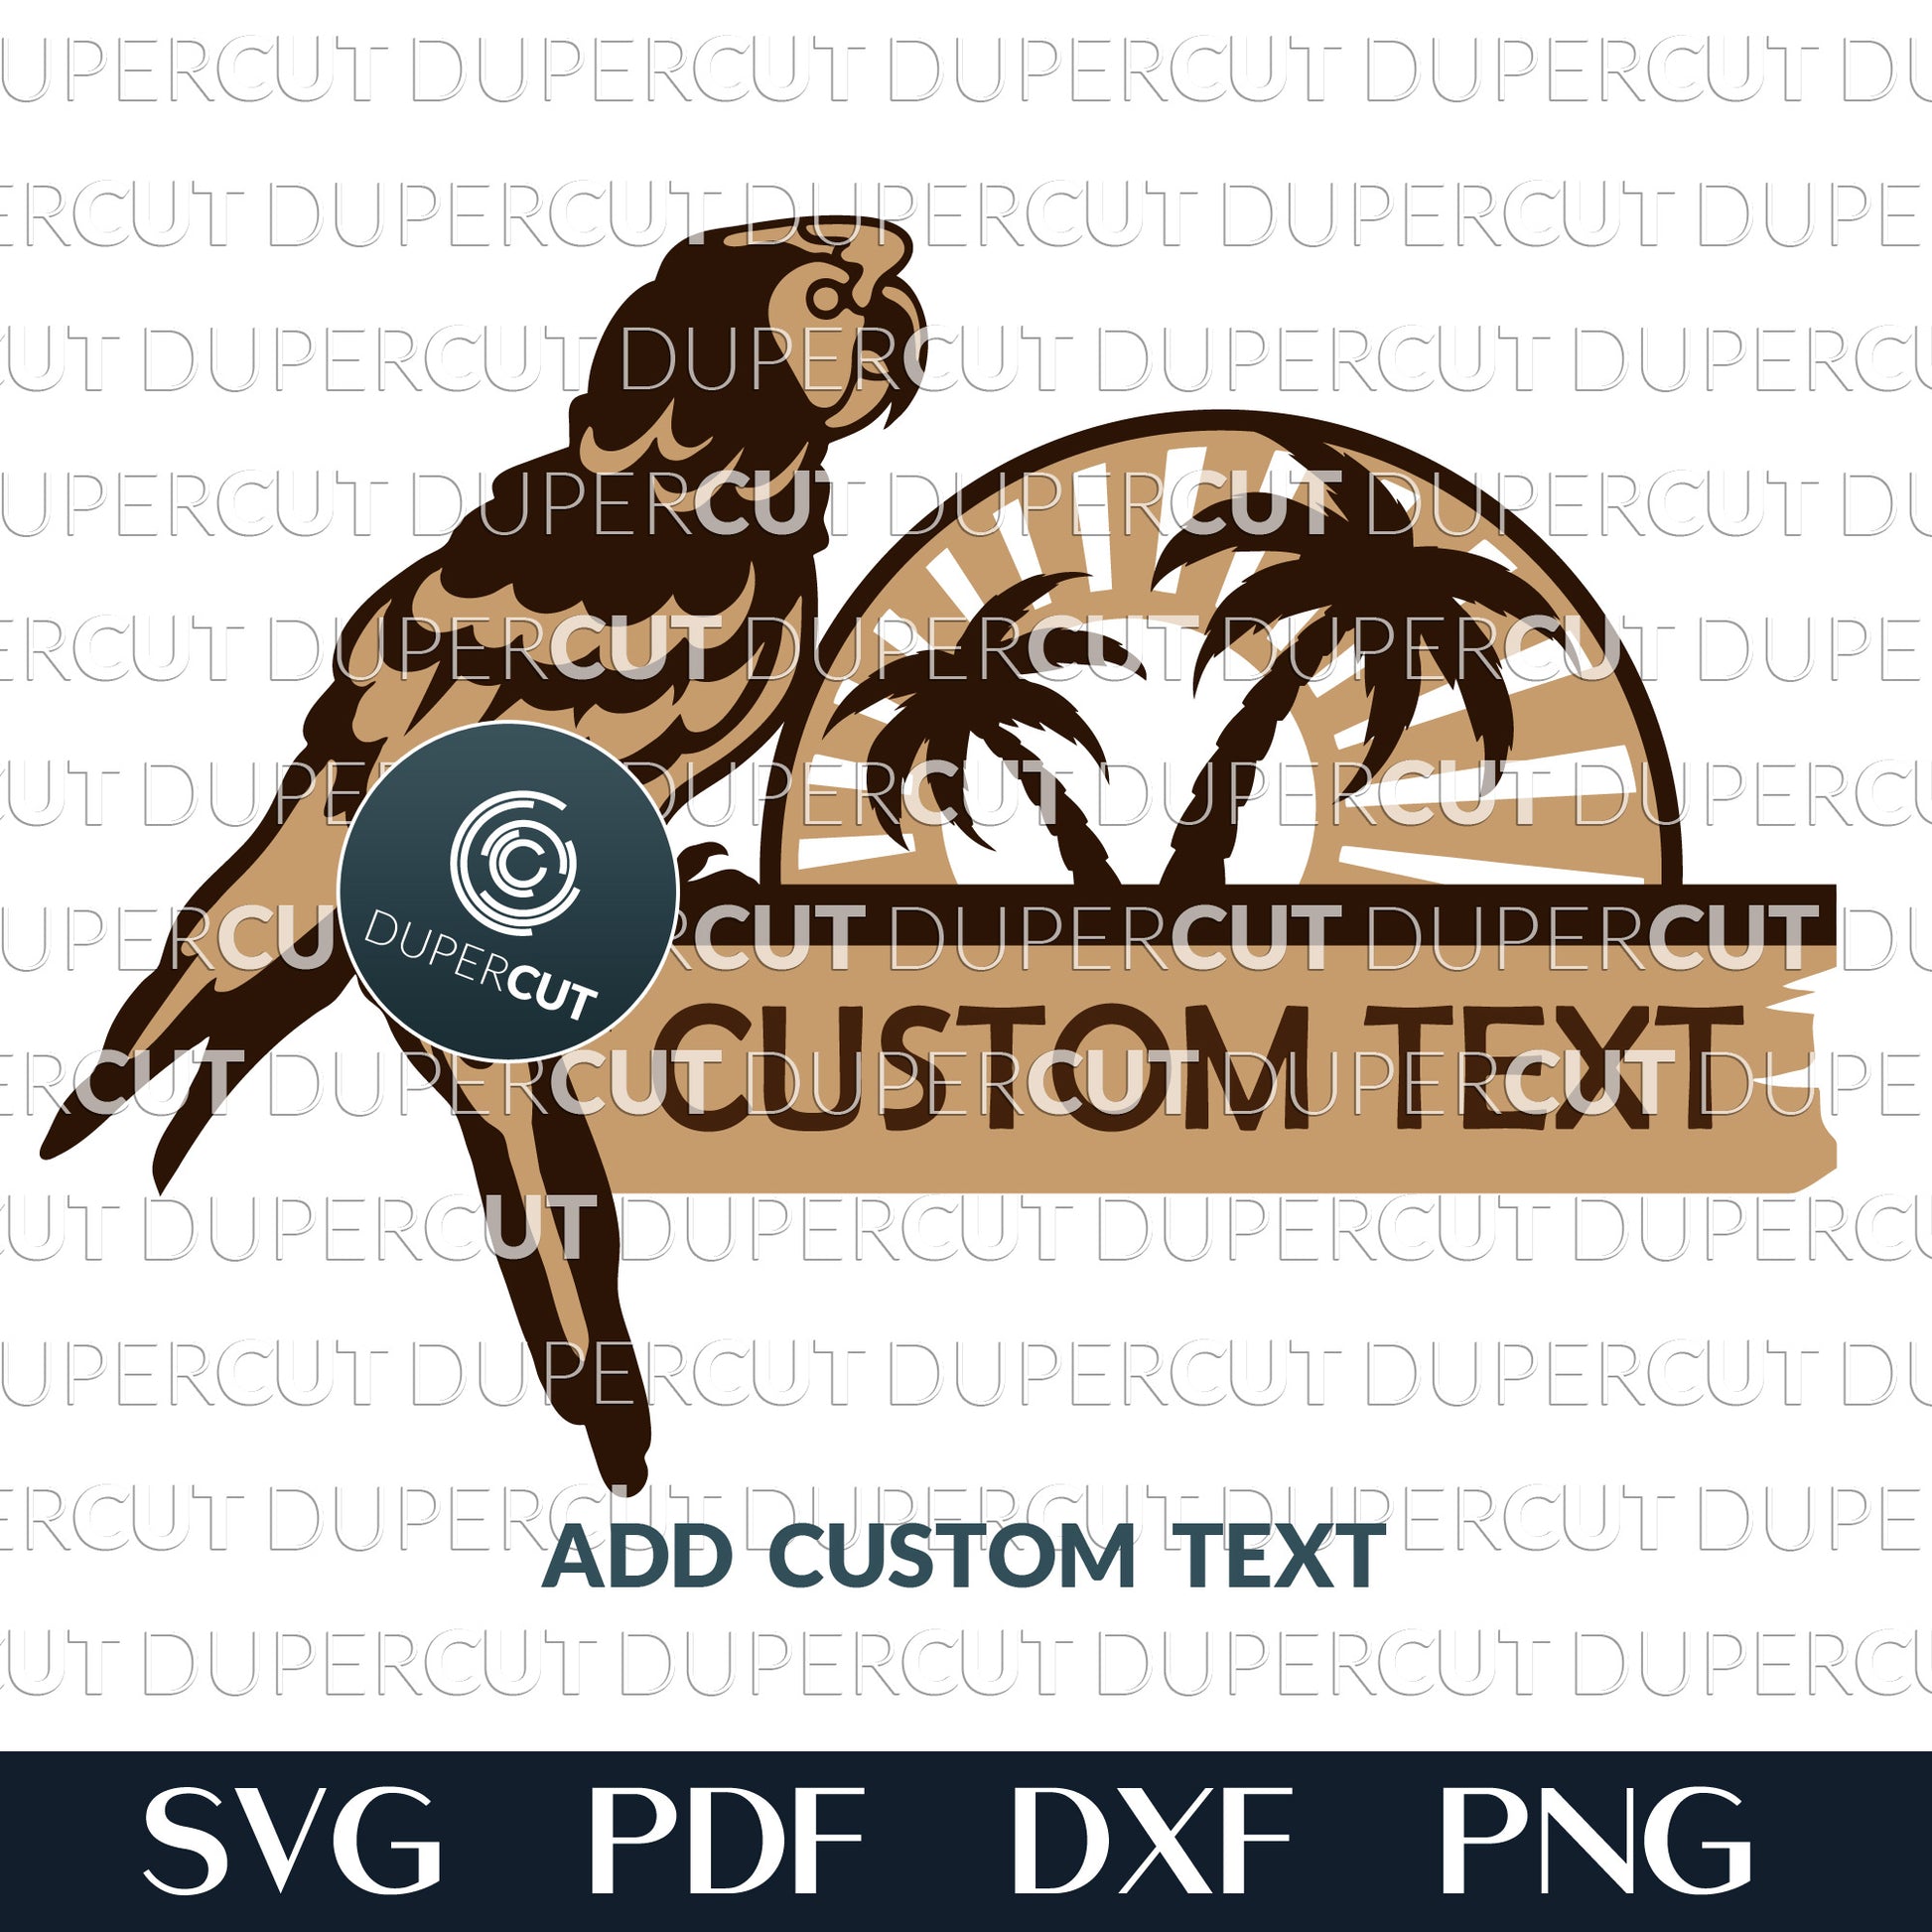 Beach parrot sign - personalized add custom text - SVG PDF DXF layered cutting files for Glowforge, Cricut, Silhouette Cameo, laser machines